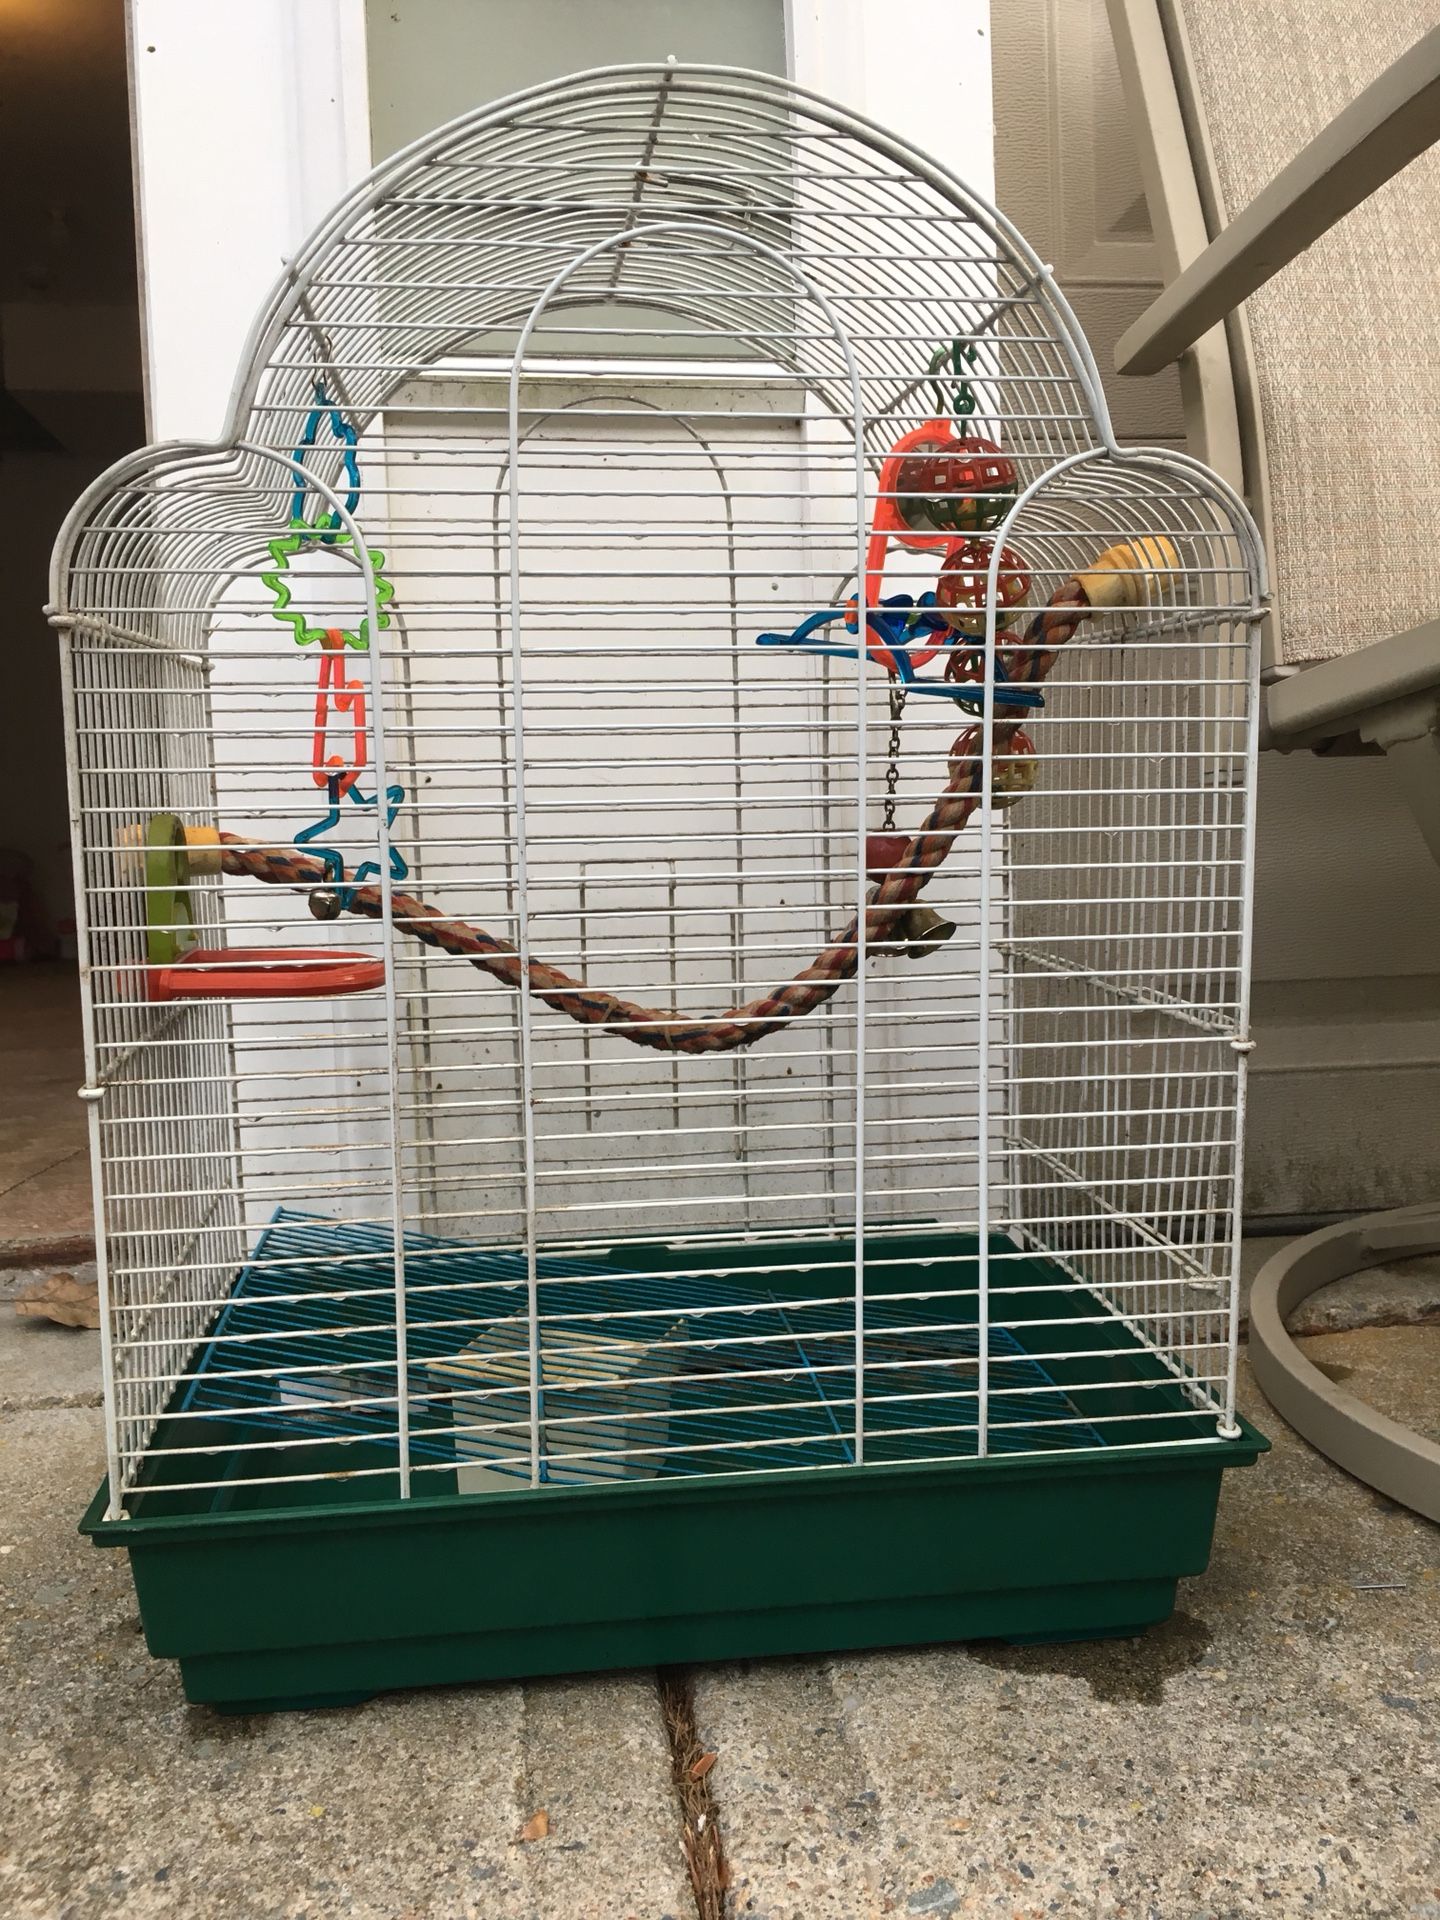 Bird cage. Had two parakeets in it at one point.